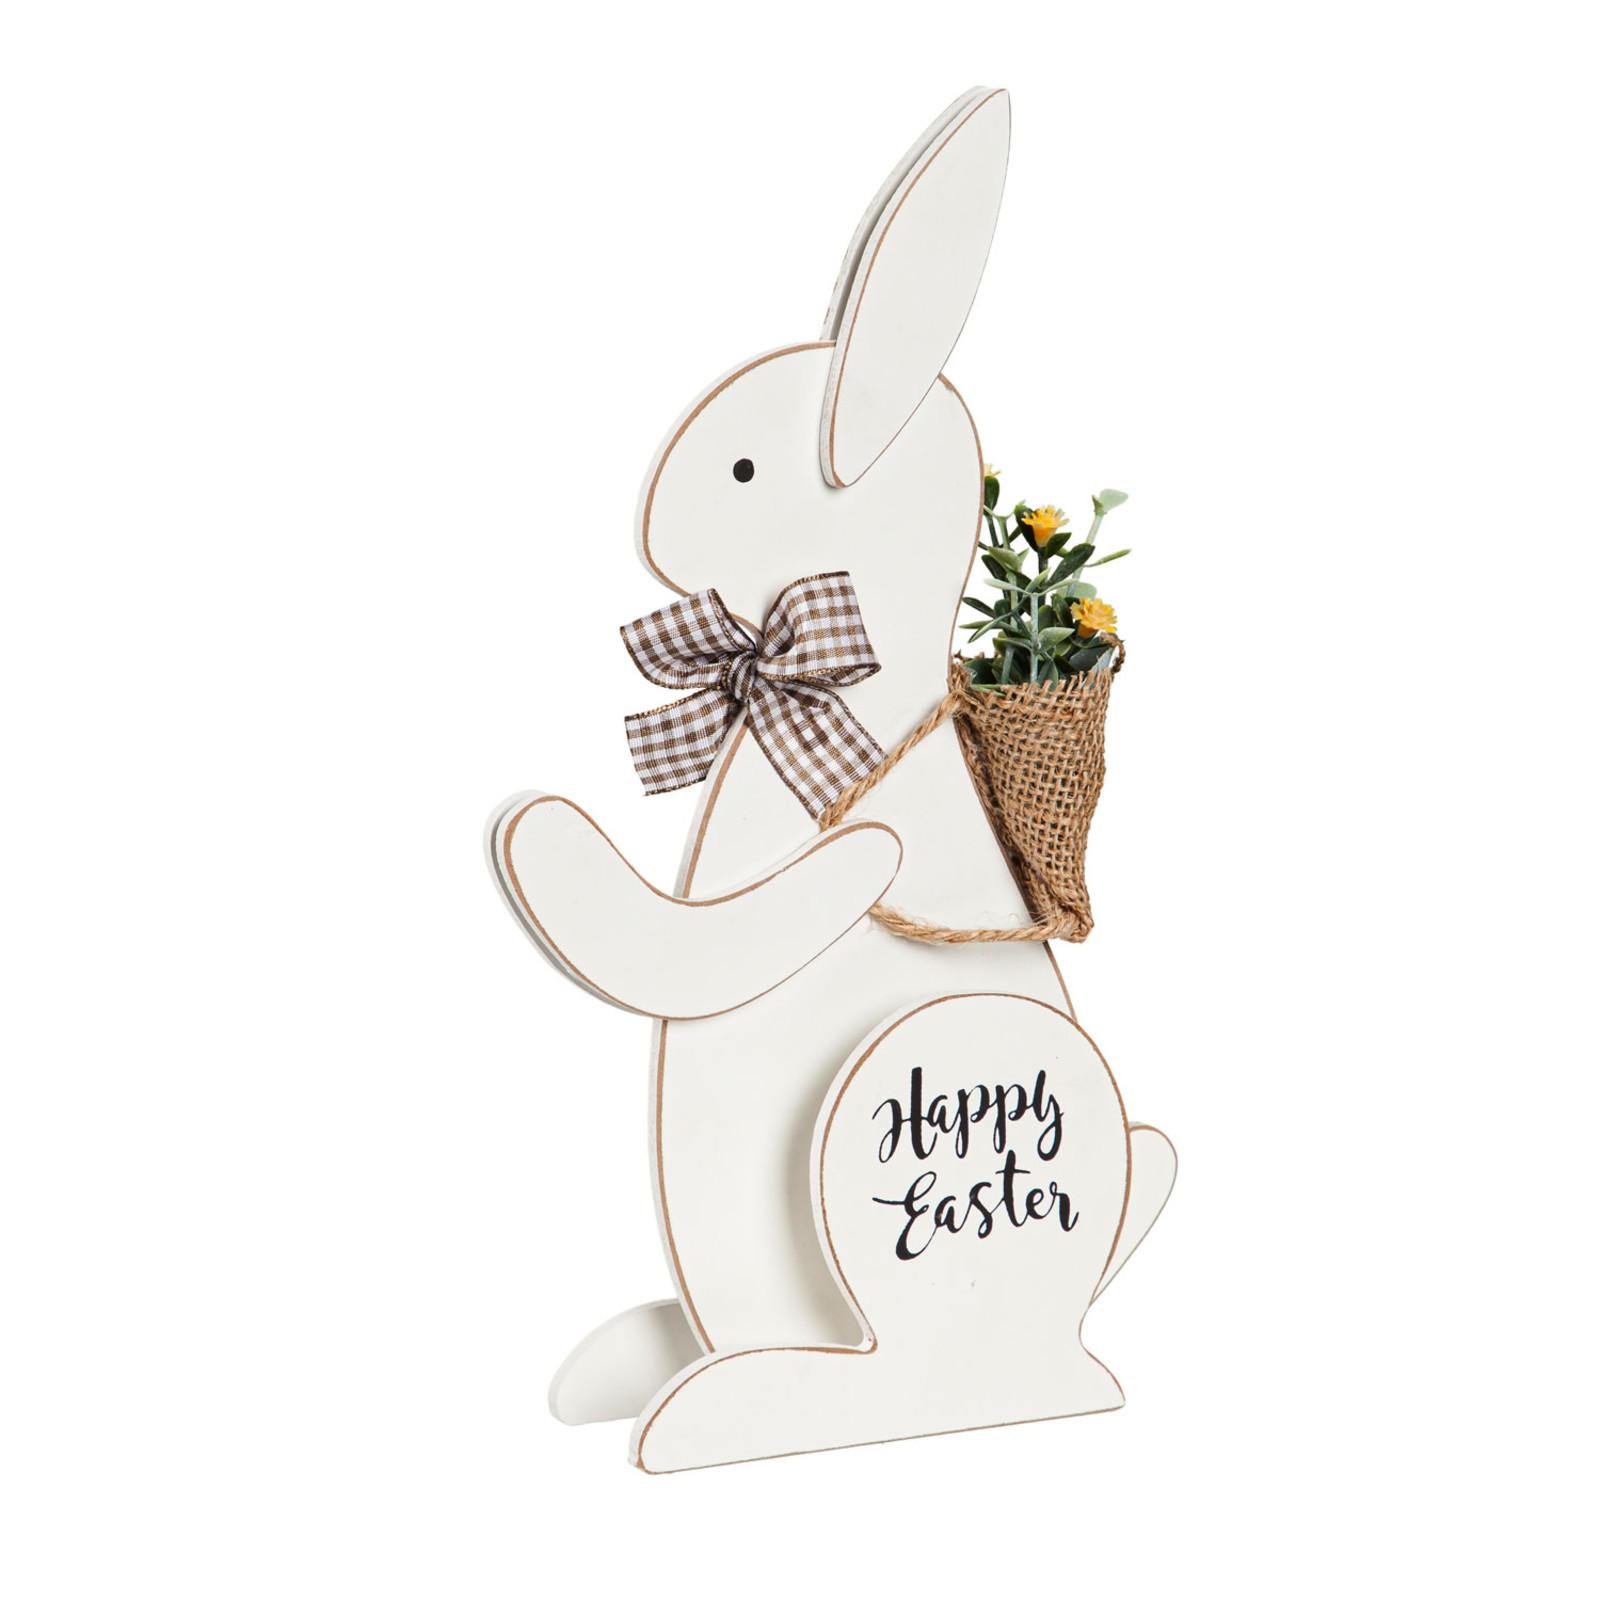 Evergreen Enterprises Wood Bunny with Artificial Table Décor  8TAW368 loading=